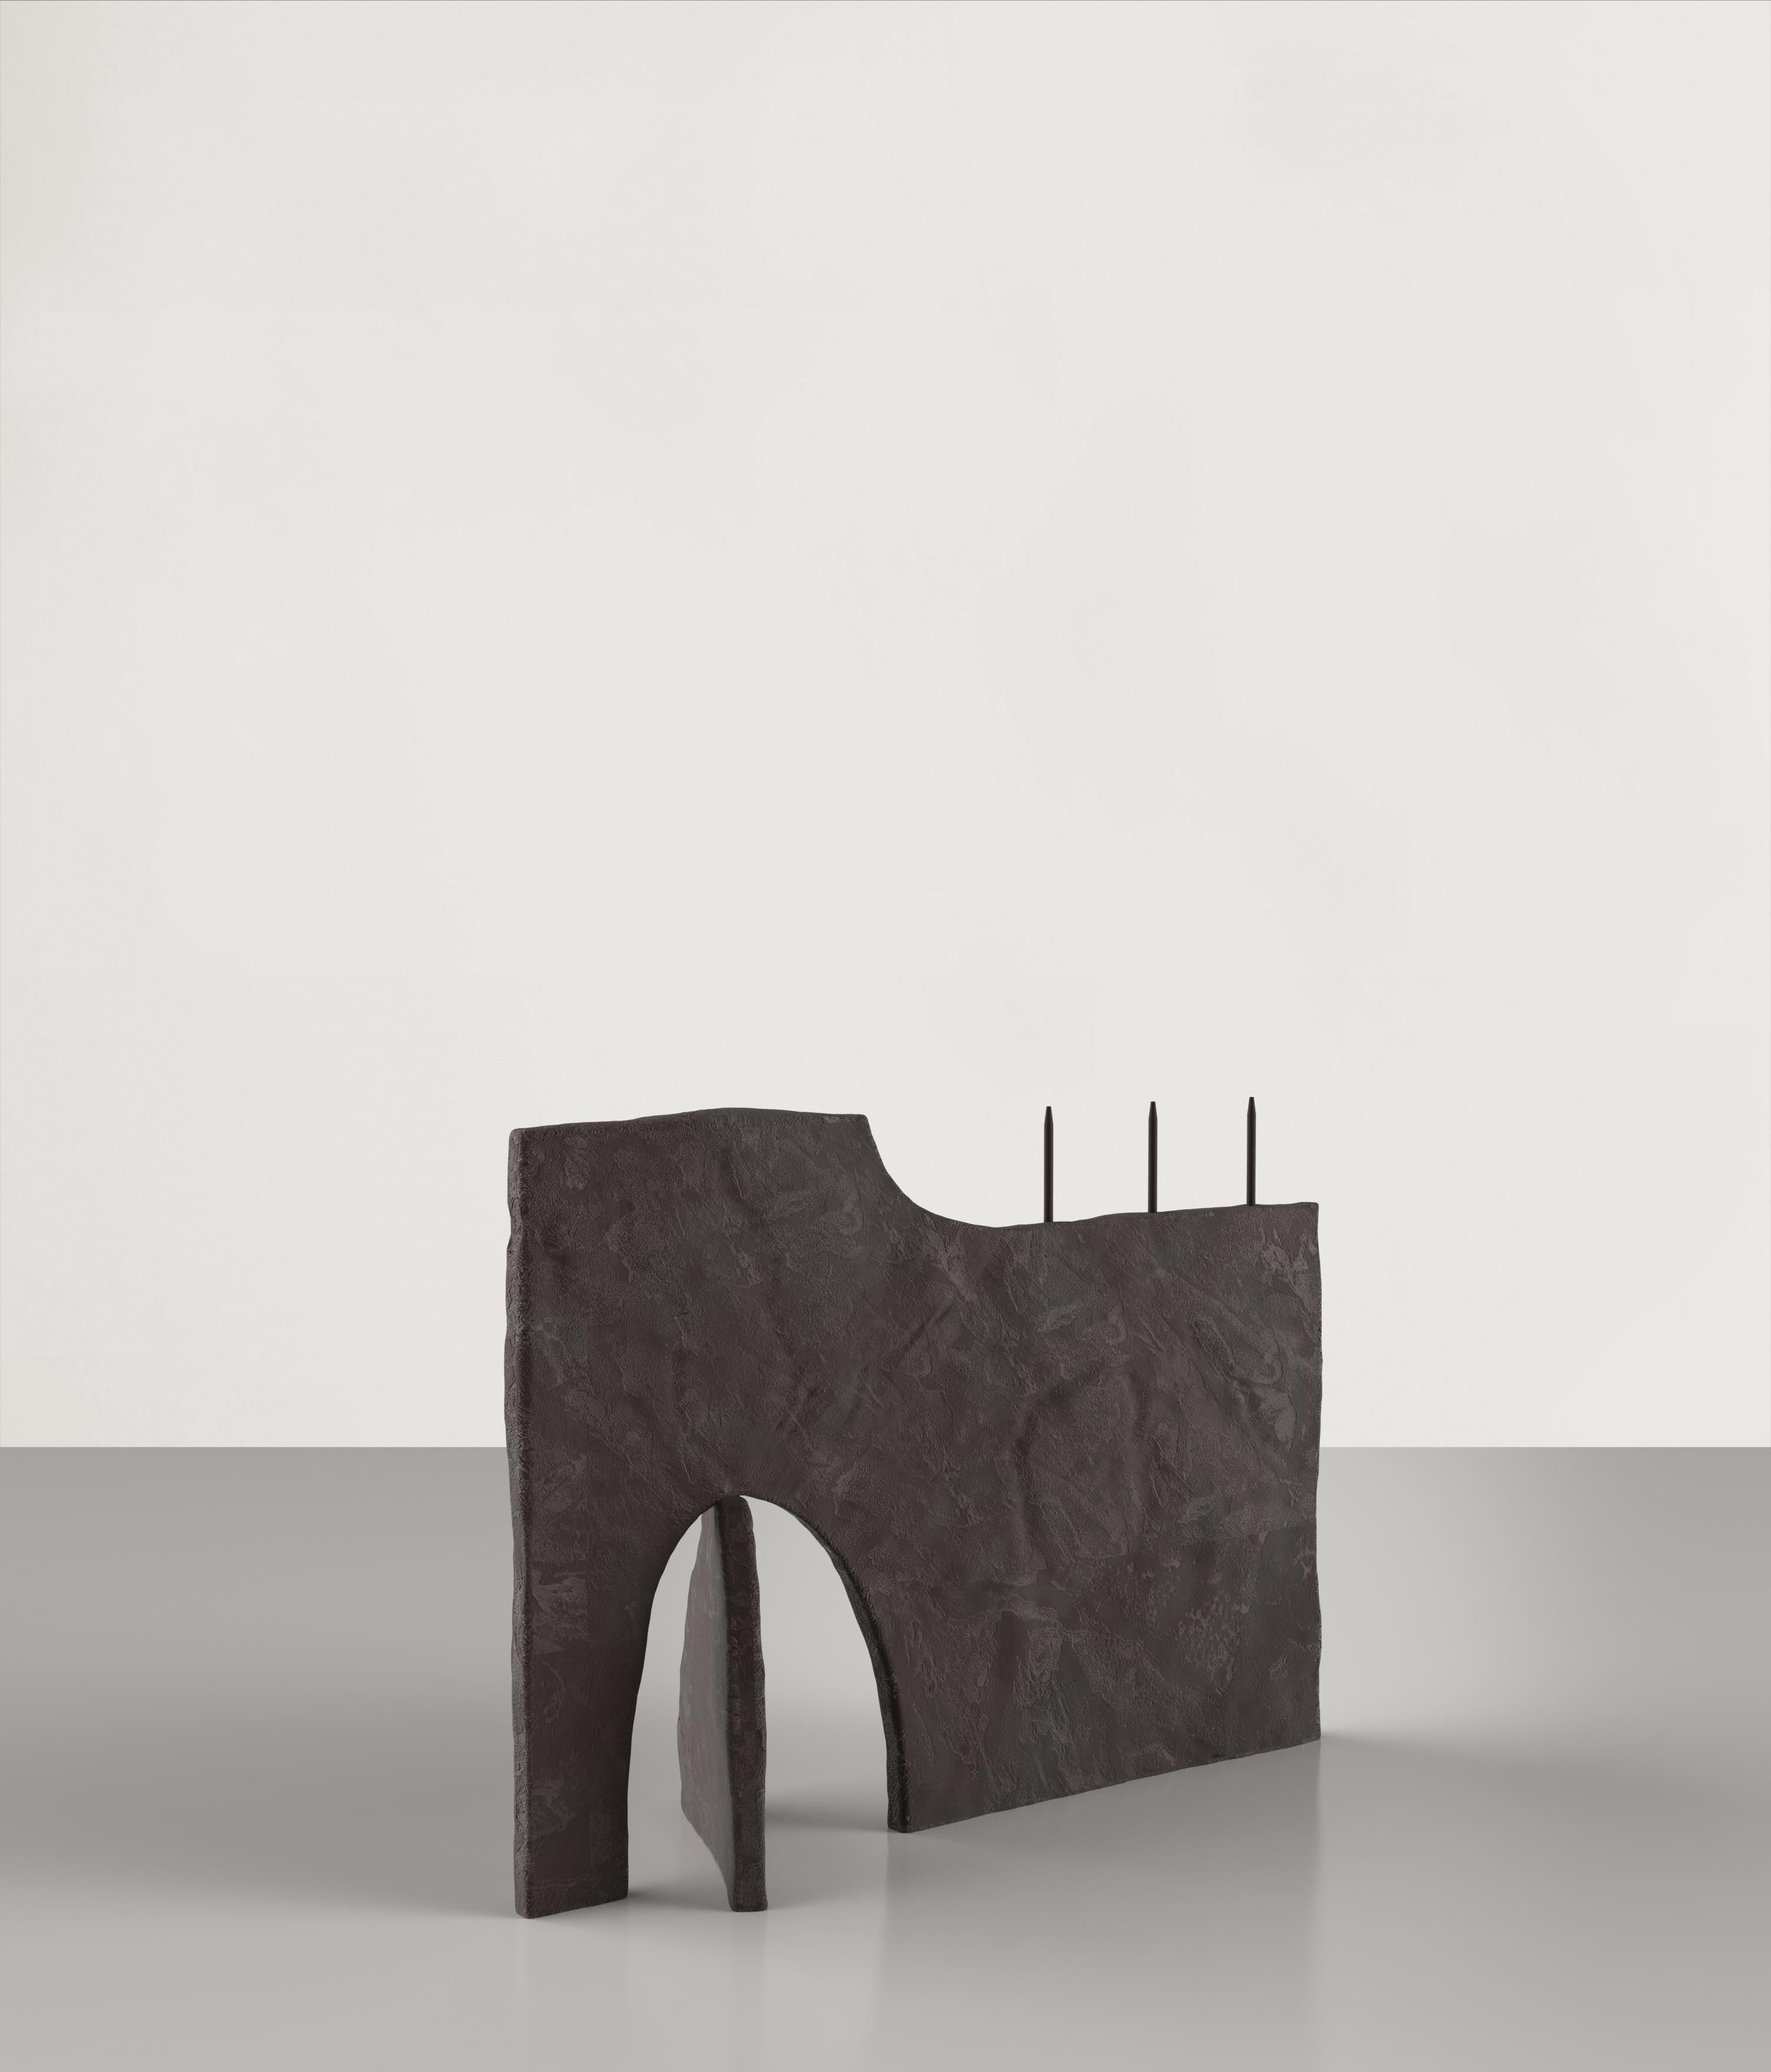 Ouble V1 is a 21st century candle holder made by young Italian artists in a brown bronze patina. It is part of the collectible design language Ouble that has been developed by the Edizione Limitata's art research team in Milan. The exploration that